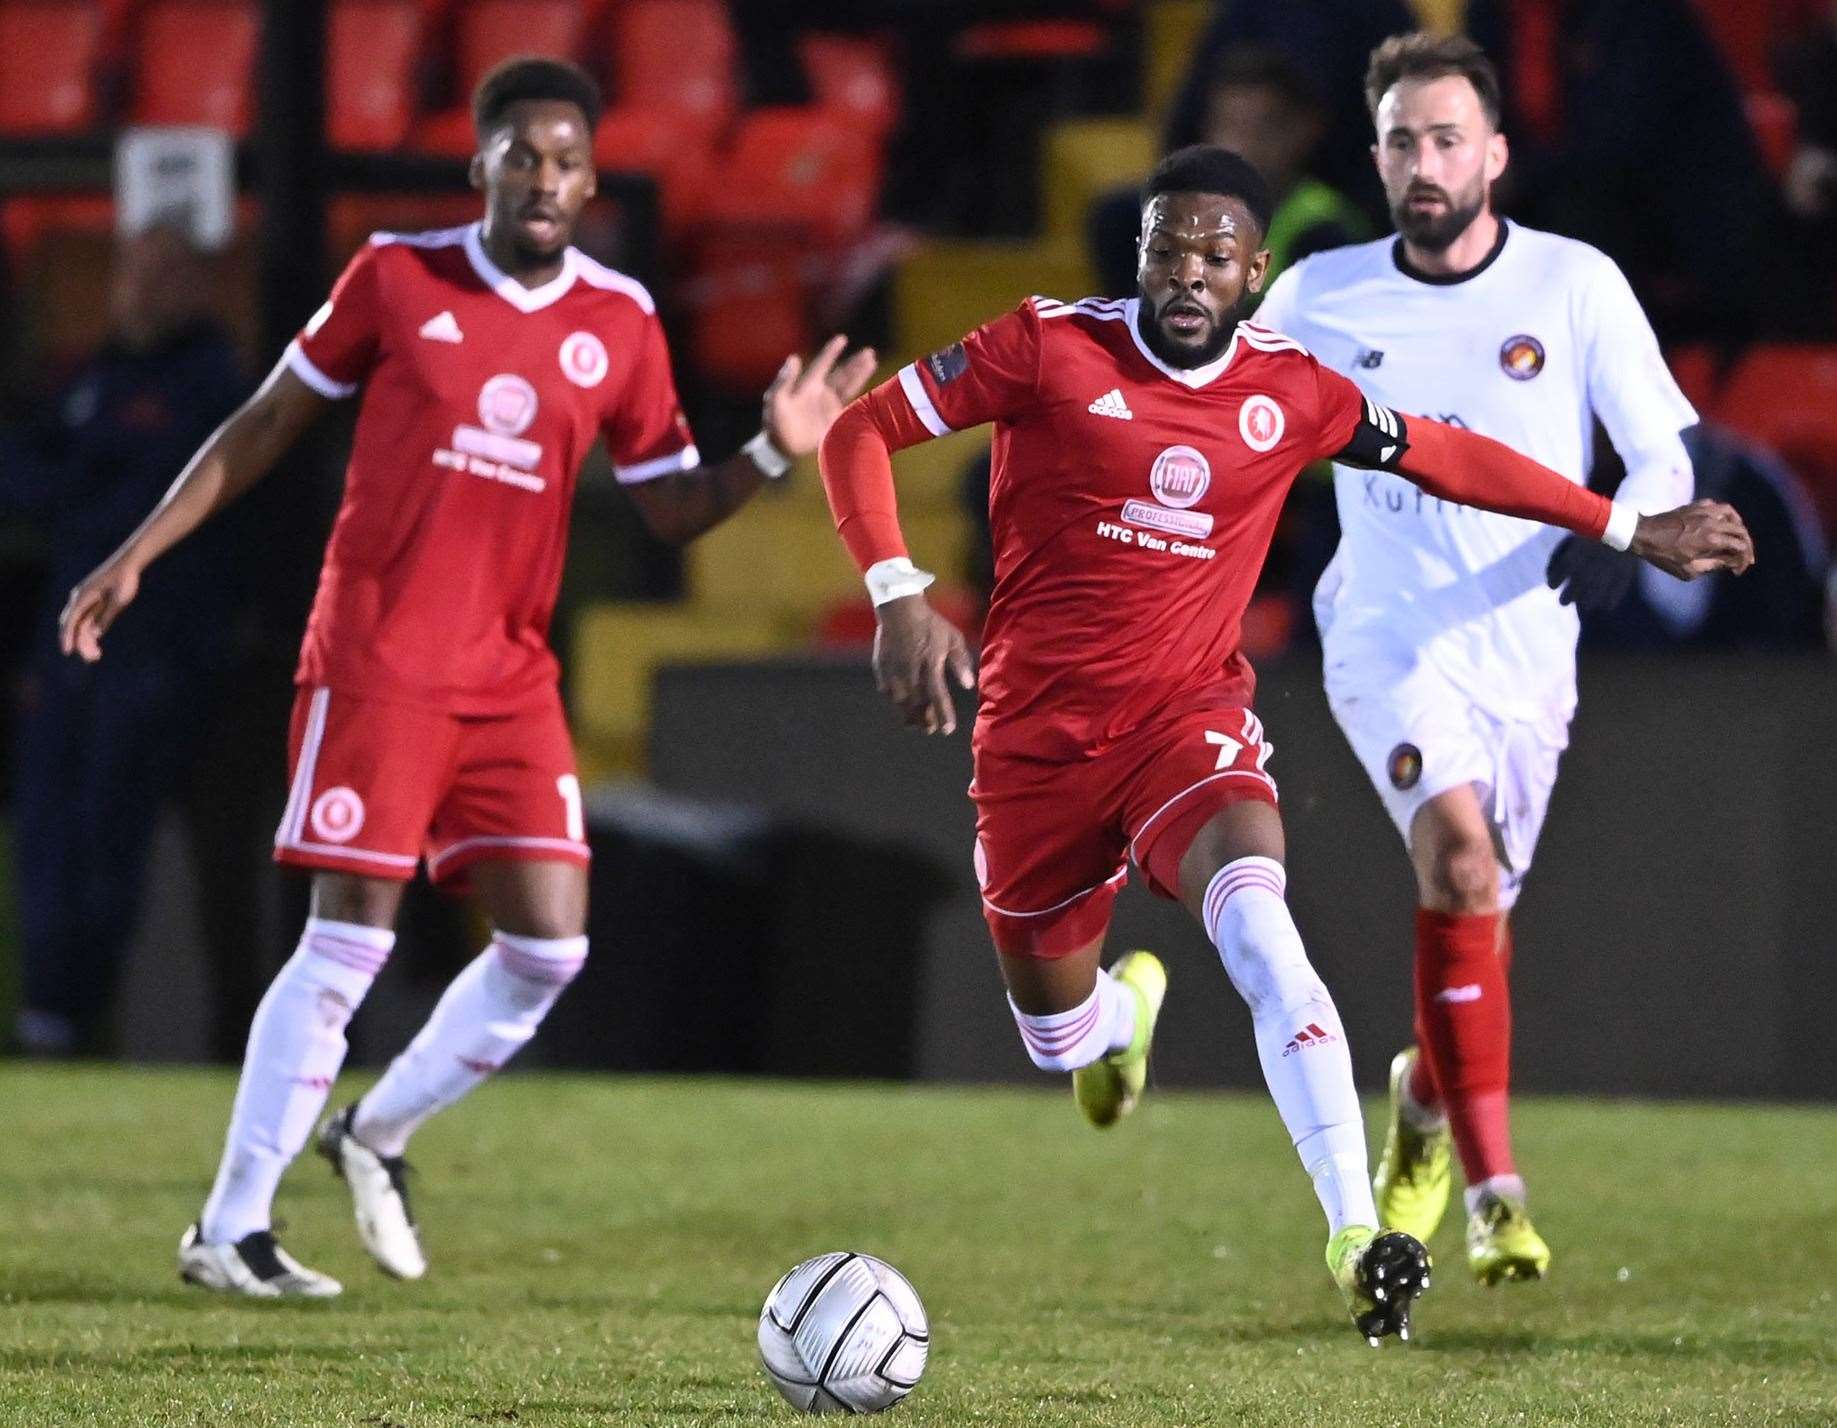 Welling in action during their 4-3 win over Ebbsfleet on Tuesday night. It proved to be their last game of the season in National League South. Picture: Keith Gillard